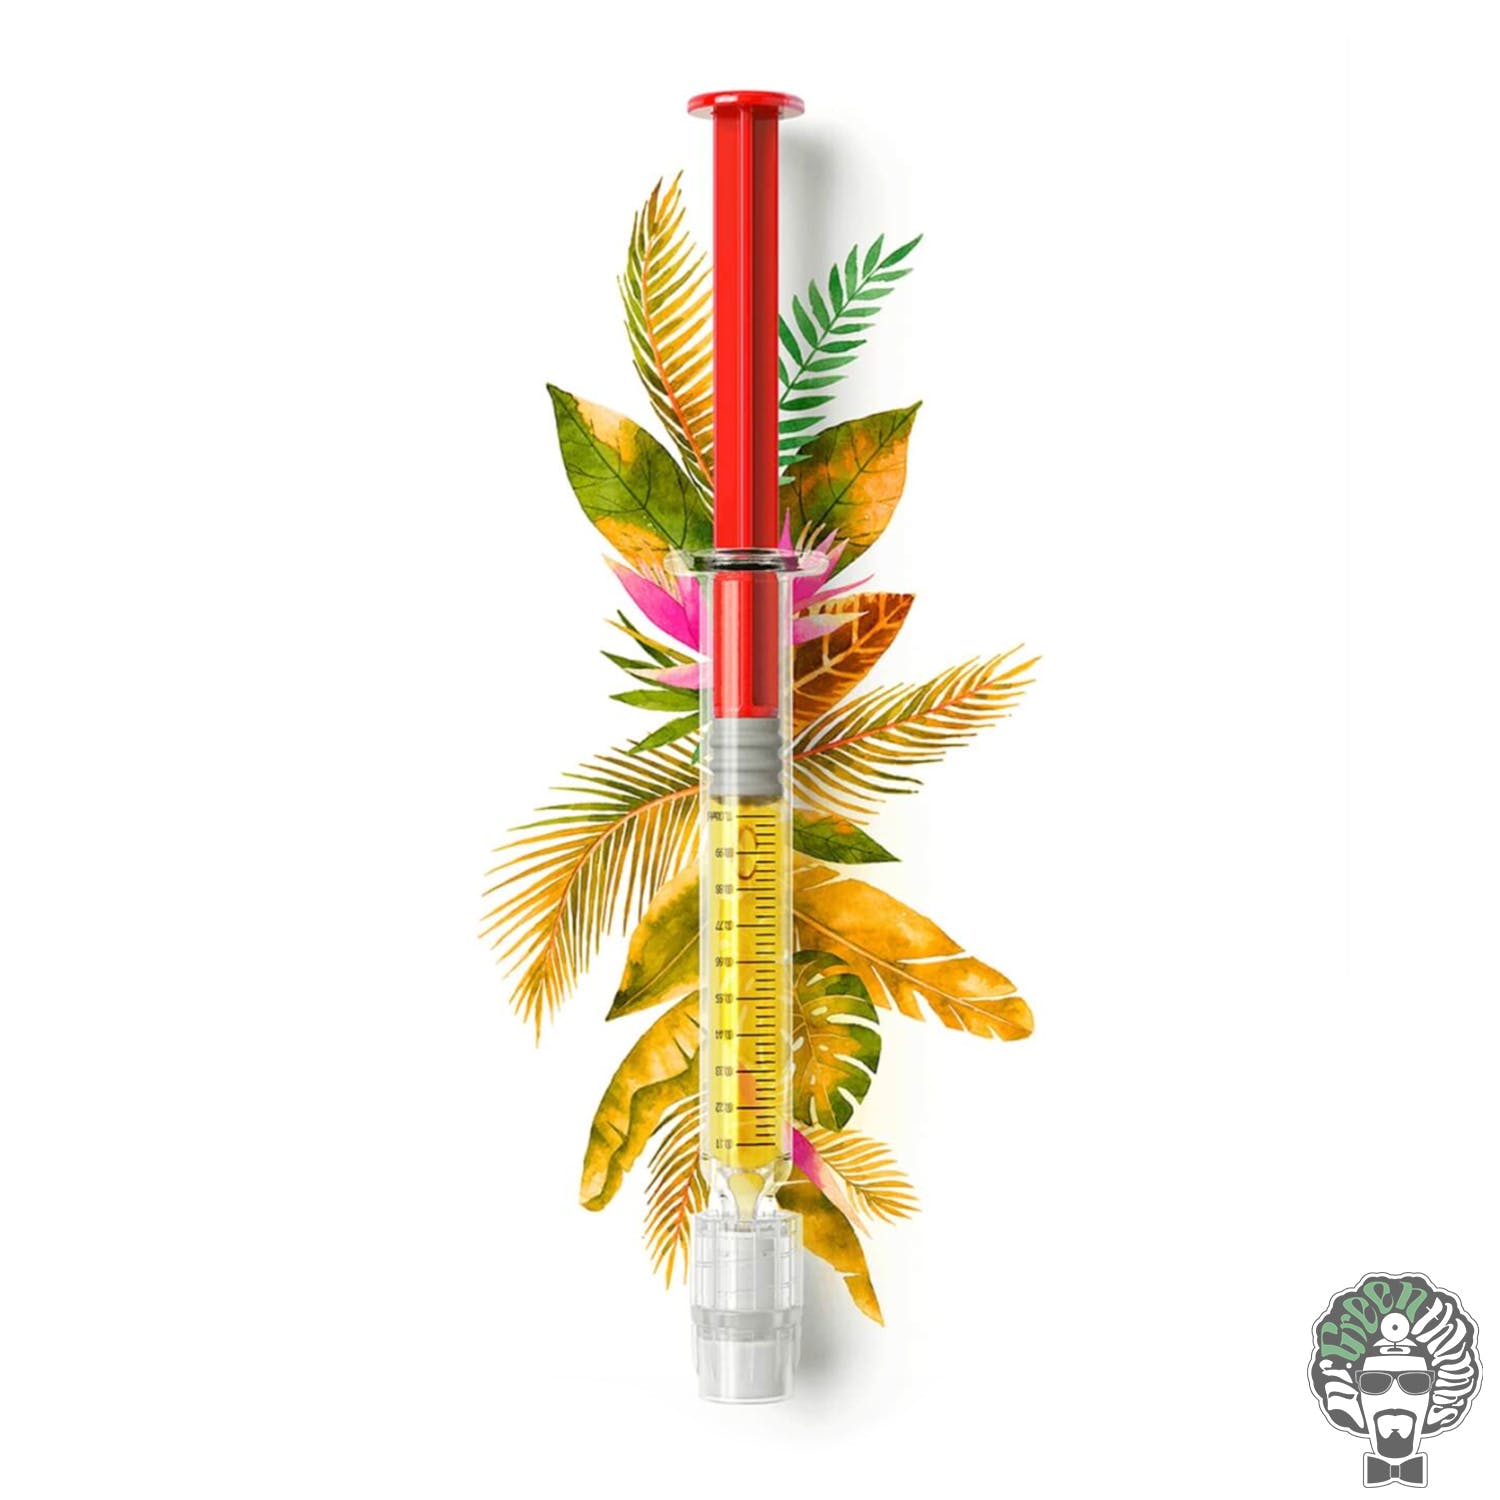 Maui Waui .8 Refillable Cartridge Tincture By Bloom